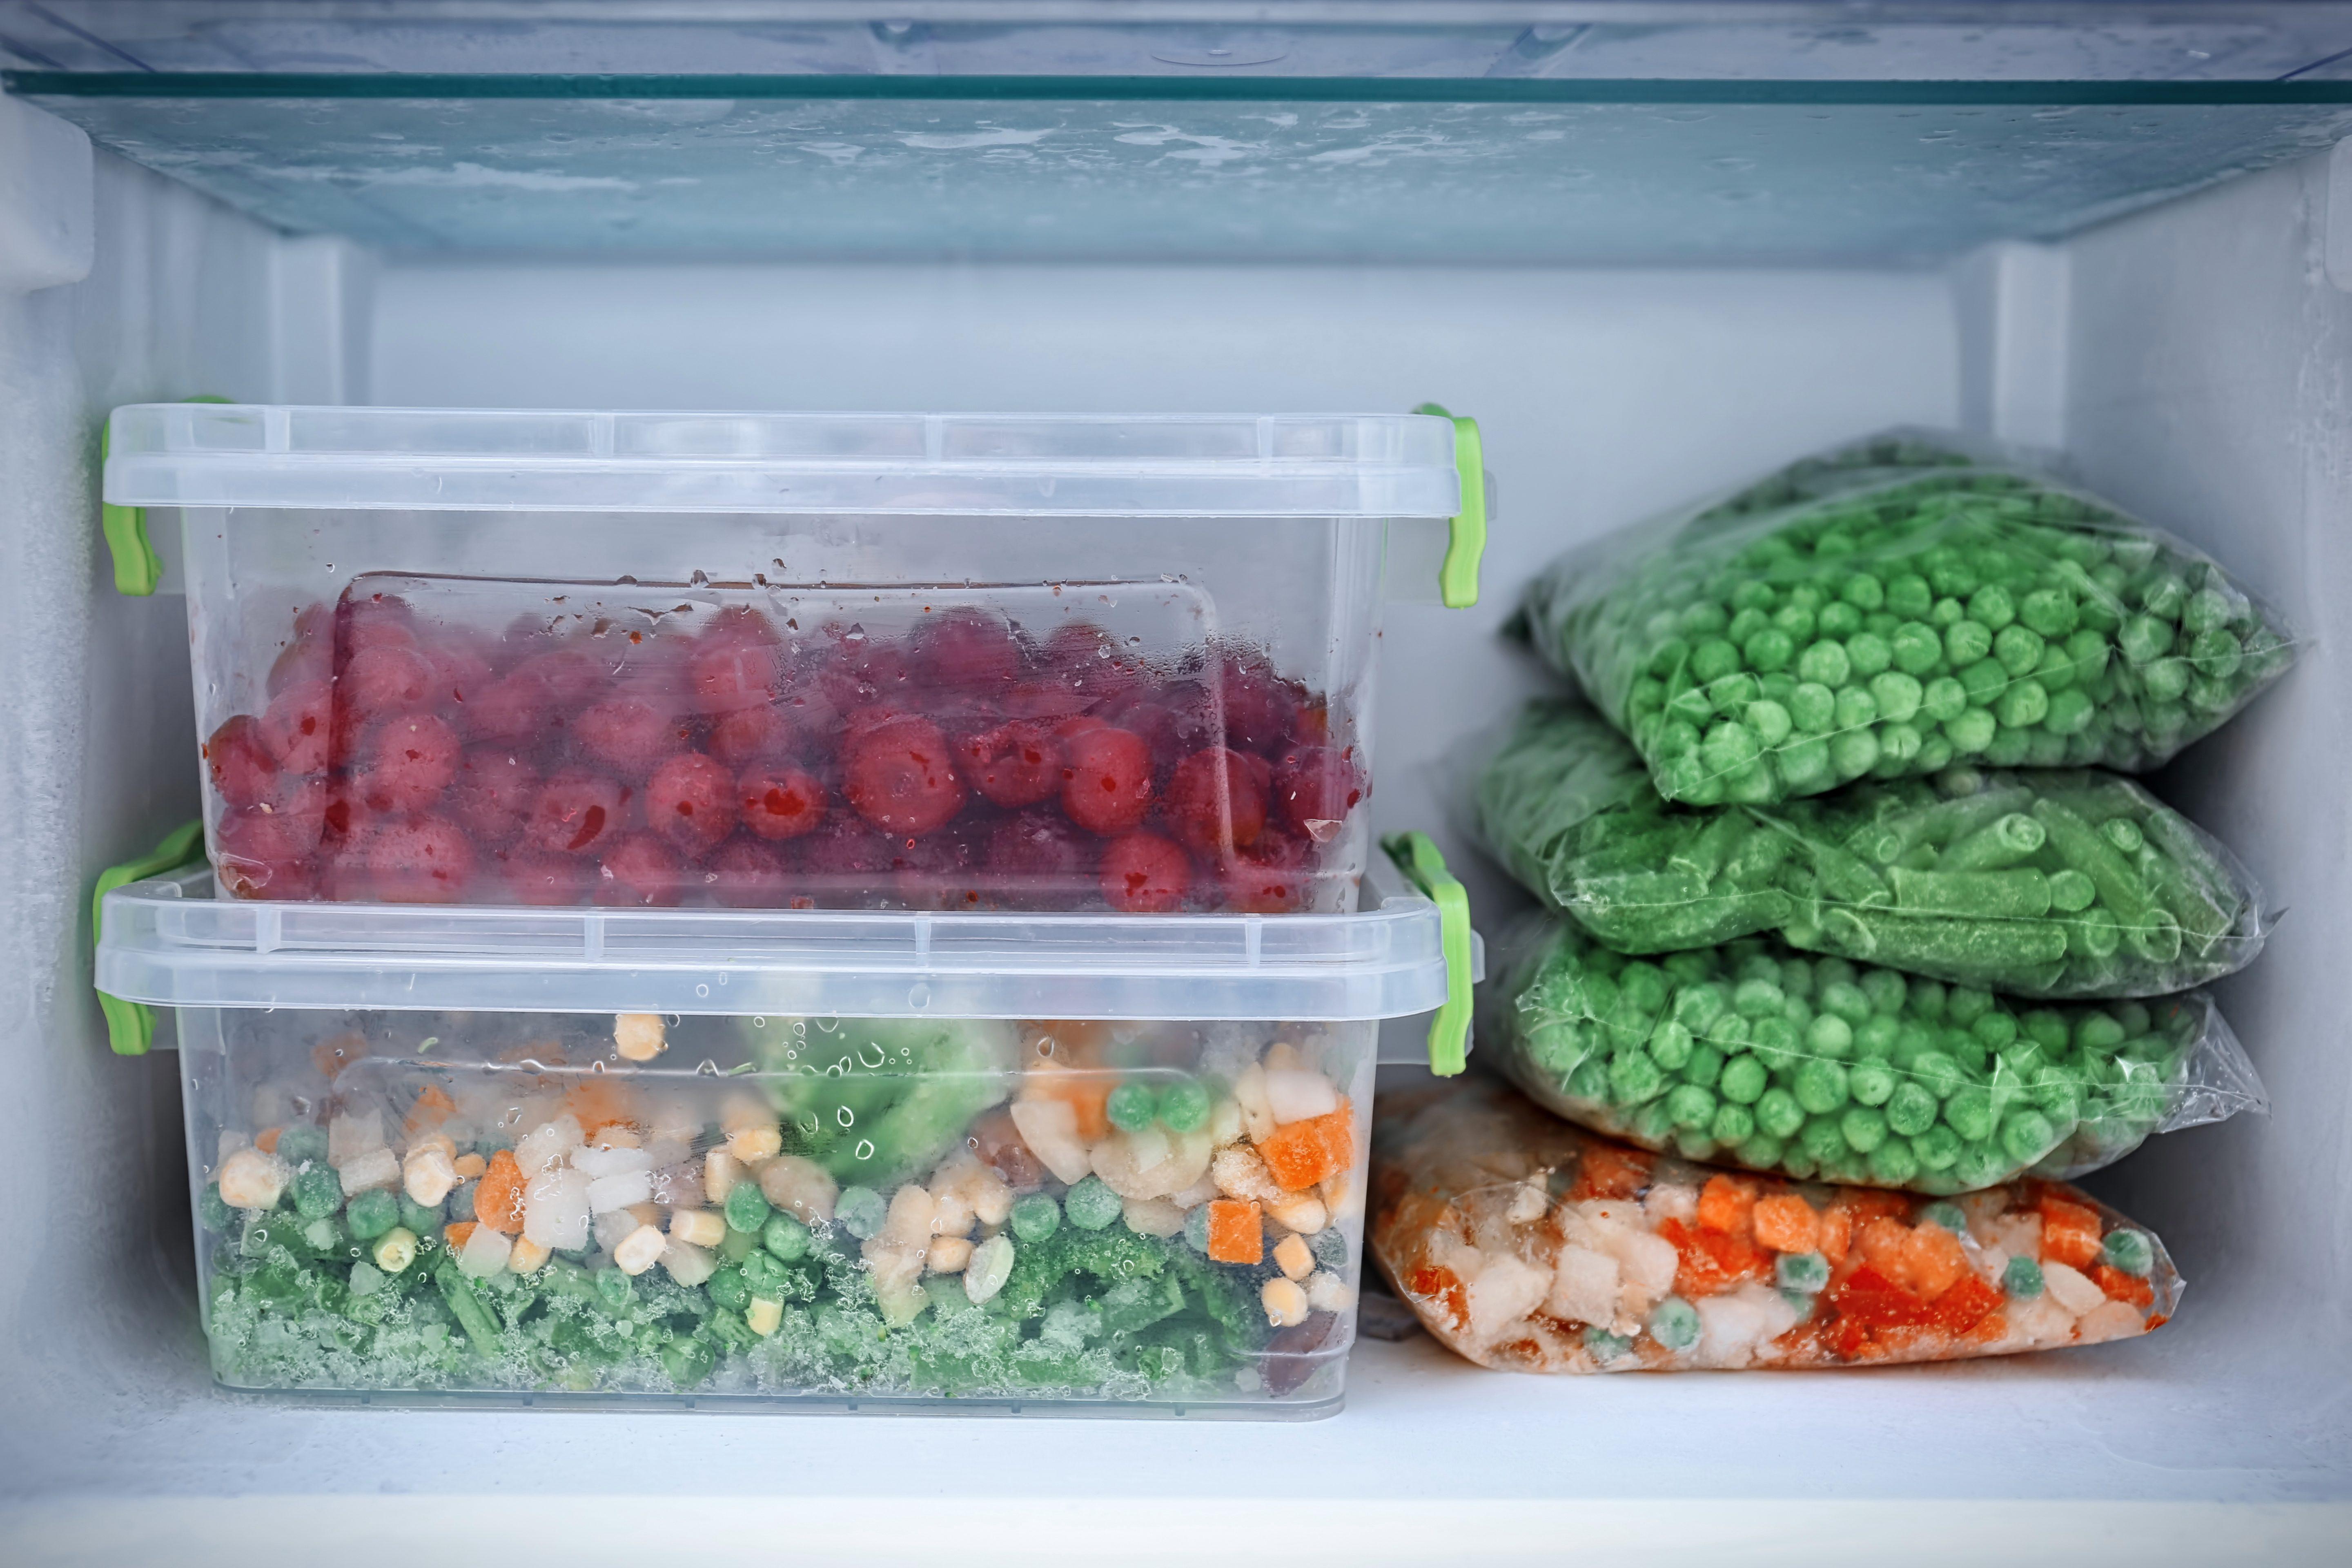 Ever wondered why your fridge has a light but your freezer doesn't?